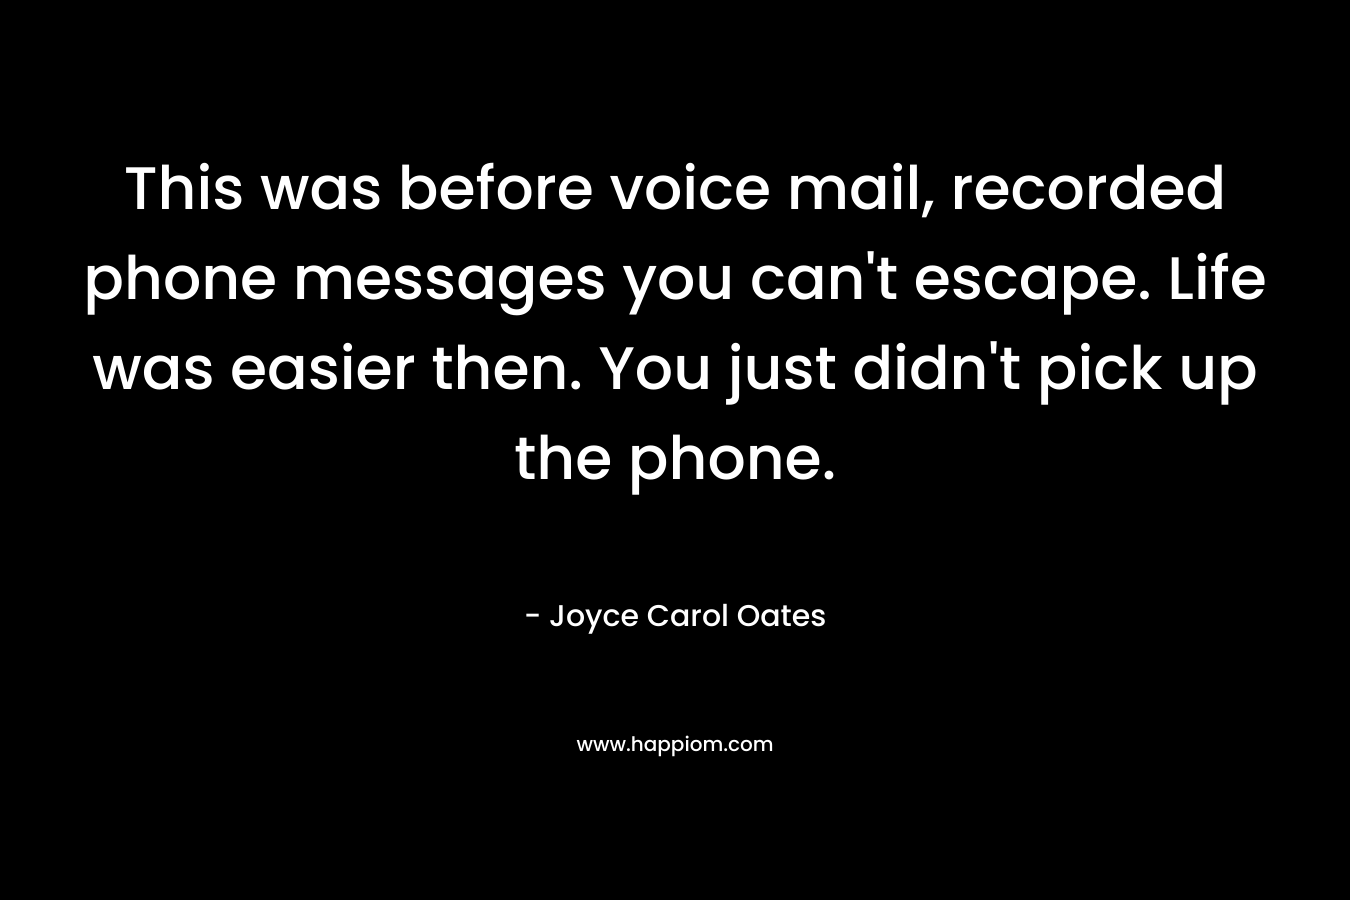 This was before voice mail, recorded phone messages you can't escape. Life was easier then. You just didn't pick up the phone.